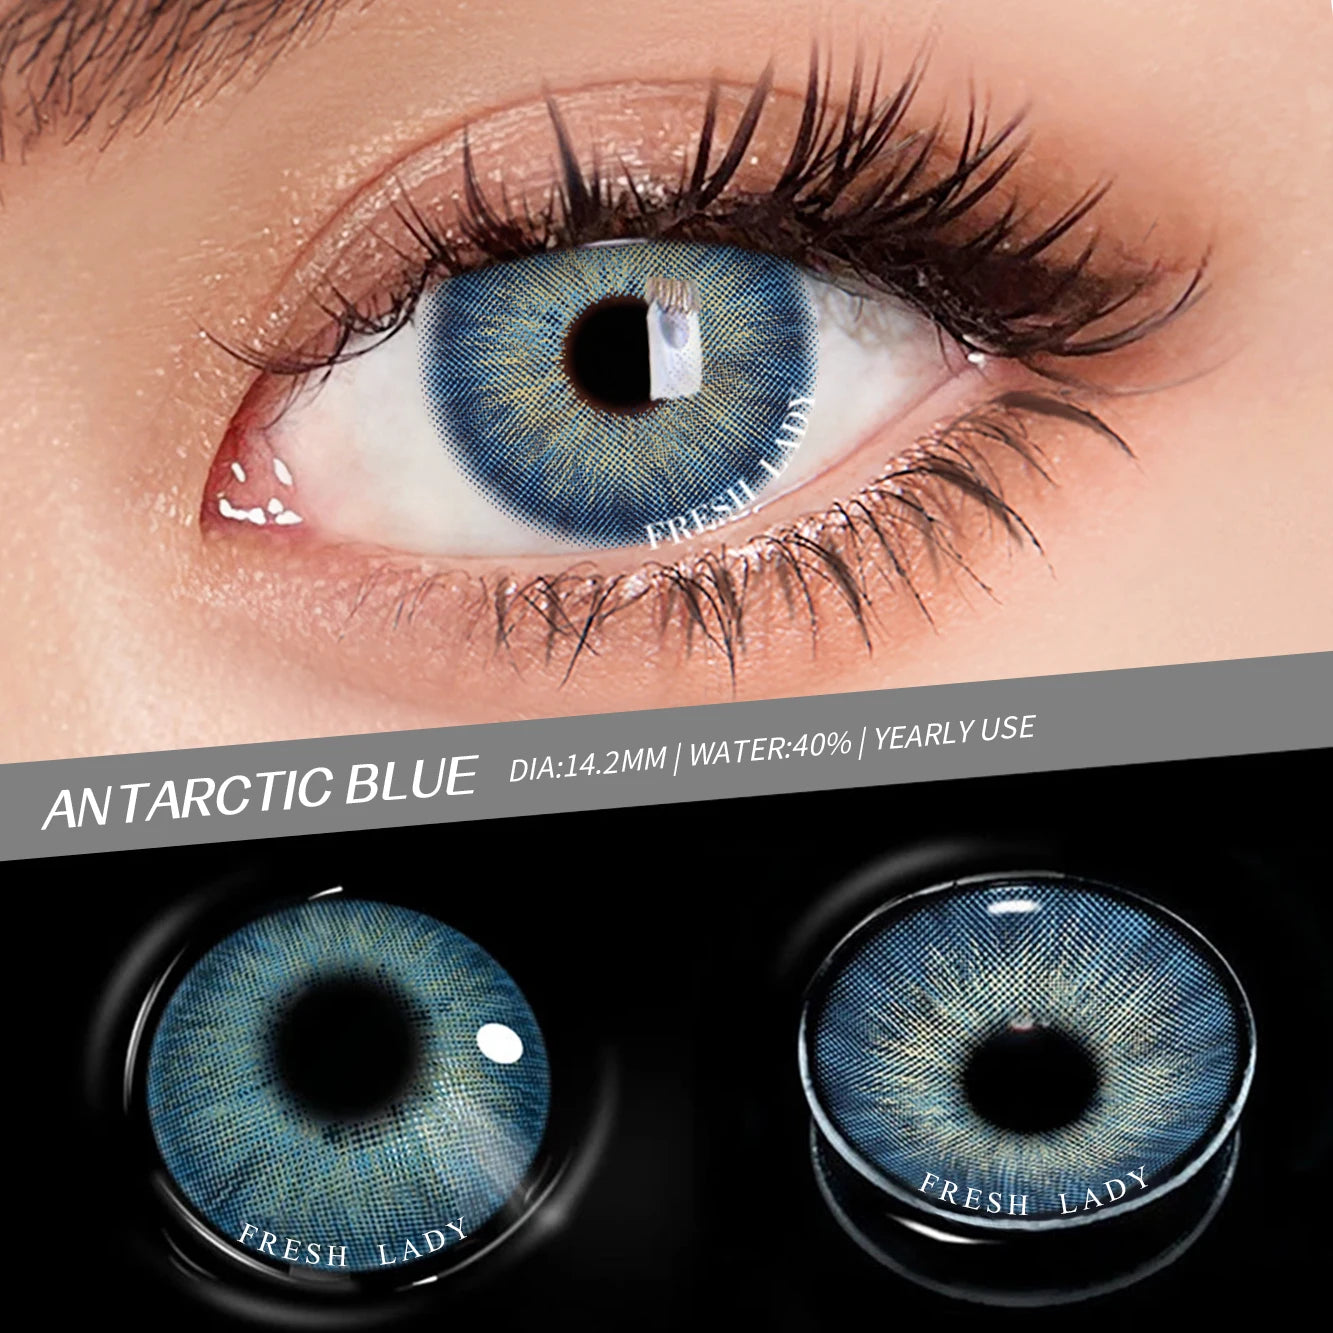 UYAAI Color Contact Lenses For Eyes Magnificent Series Colored Lenses Blue Black Multicolored Lenses Beauty Makeup